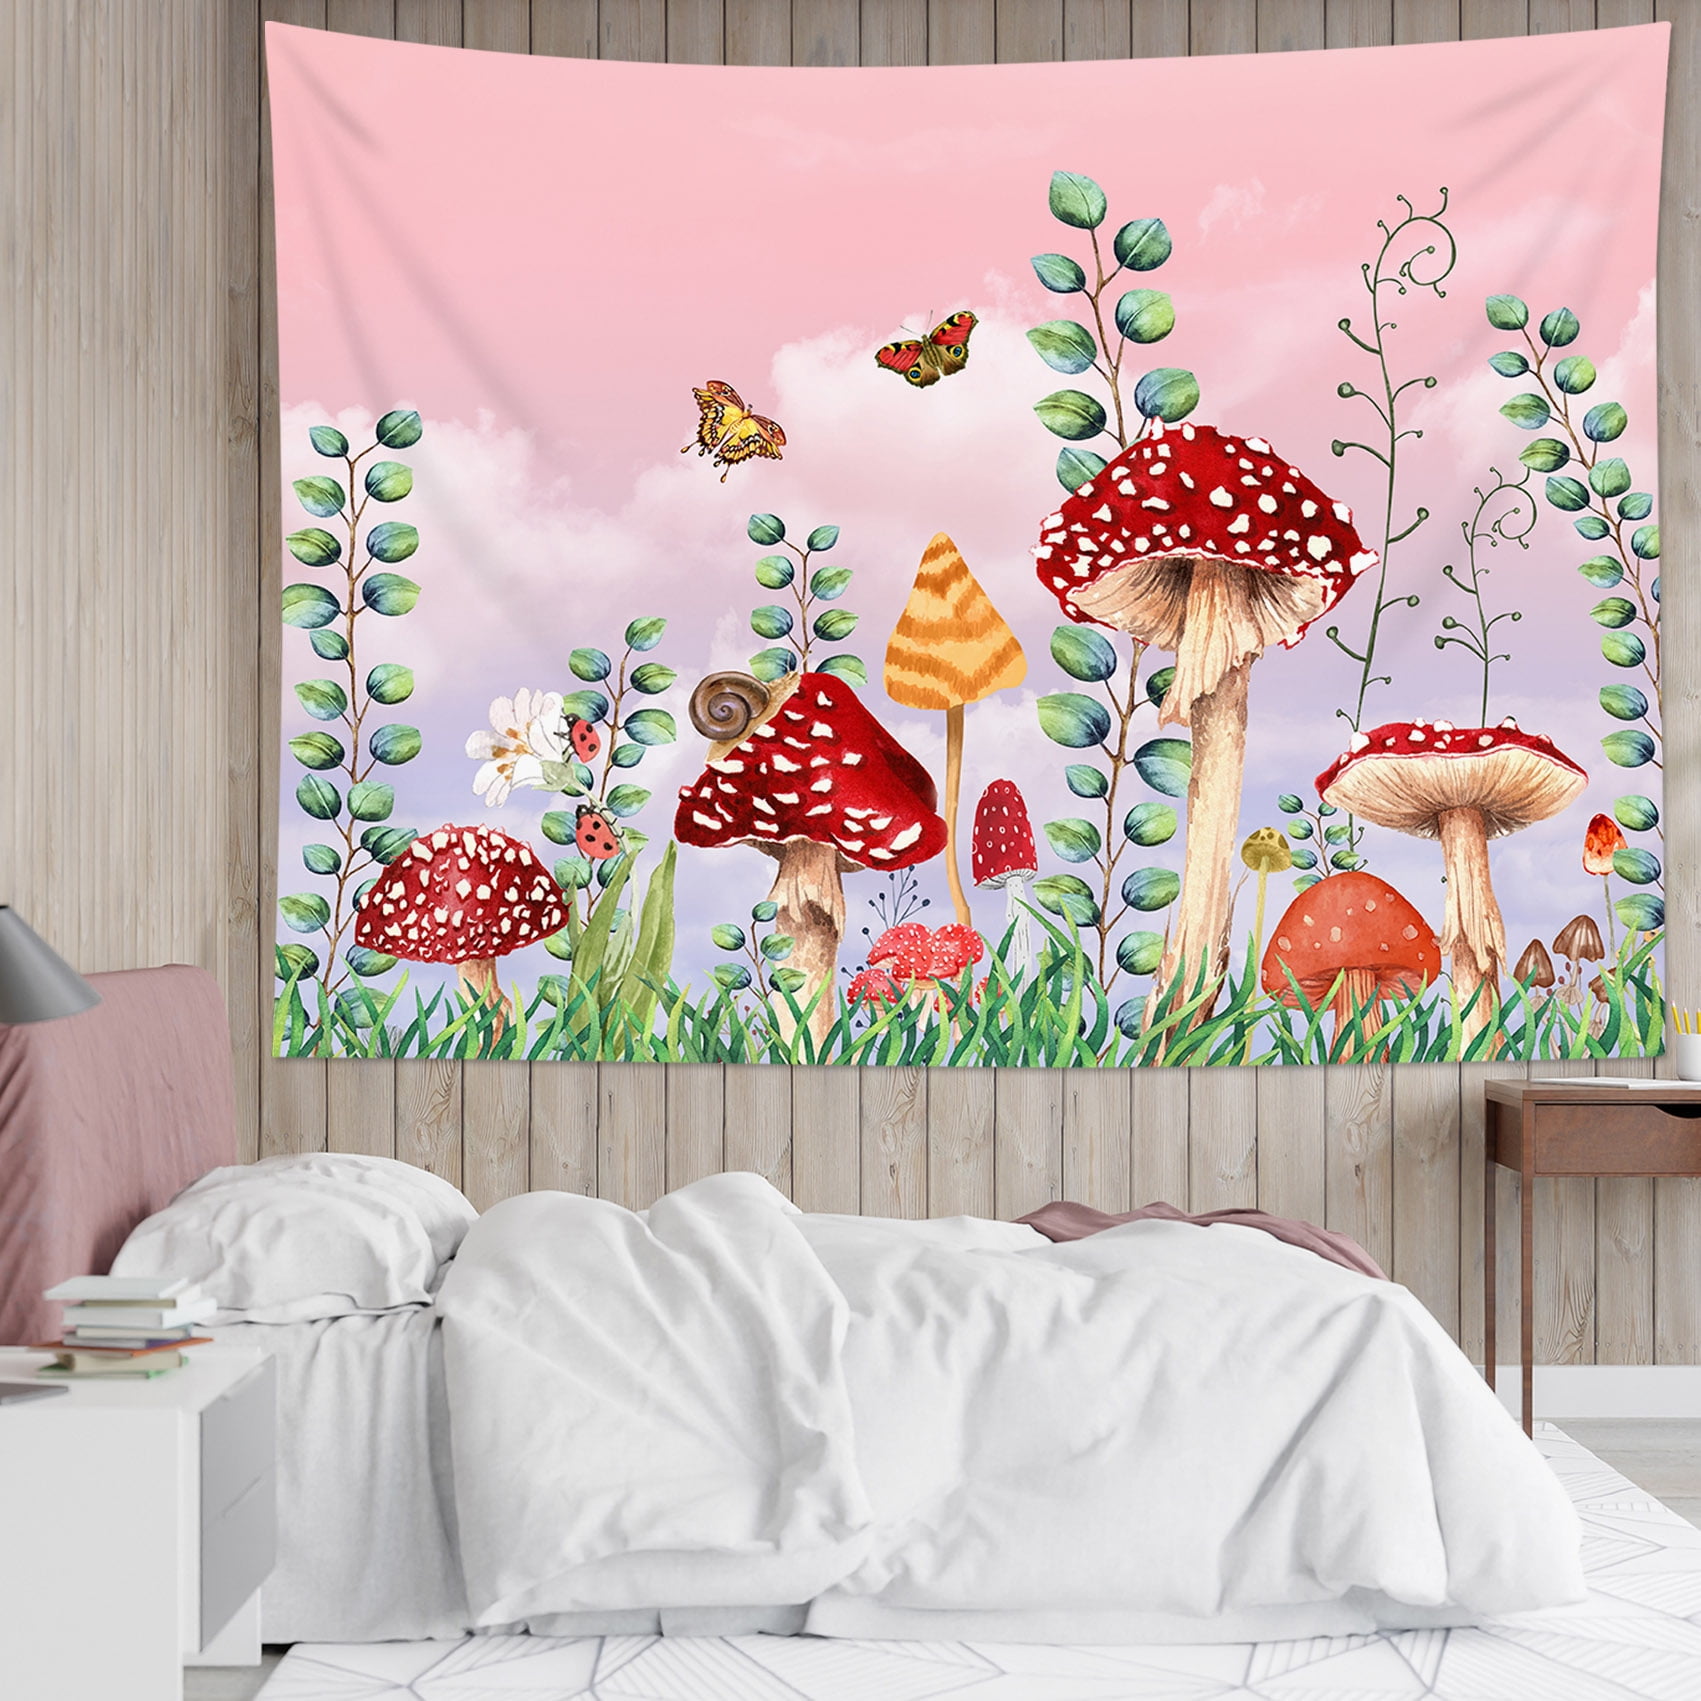  asdas Tapestry Wall Hanging,Polyester Home Decoration Bedroom  Living Room Tapestries, Strawberry Rabbit Tablecloth Landscape Art Sofa  Background Wall Covering Decoration Gifts Young People,Strawber, 150*130cm  : Home & Kitchen